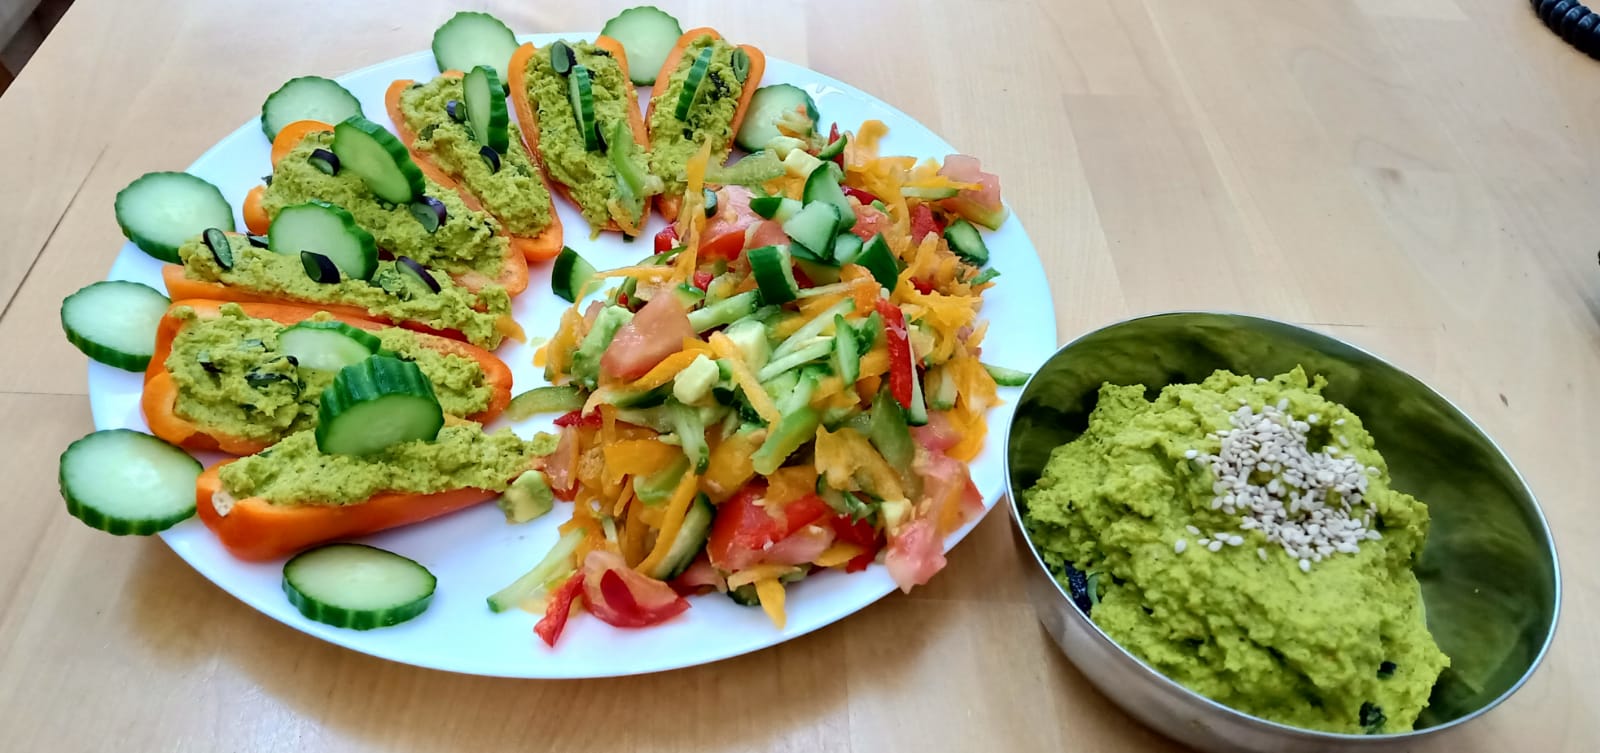 Veg Salad with Stuffed Peppers and Chutney